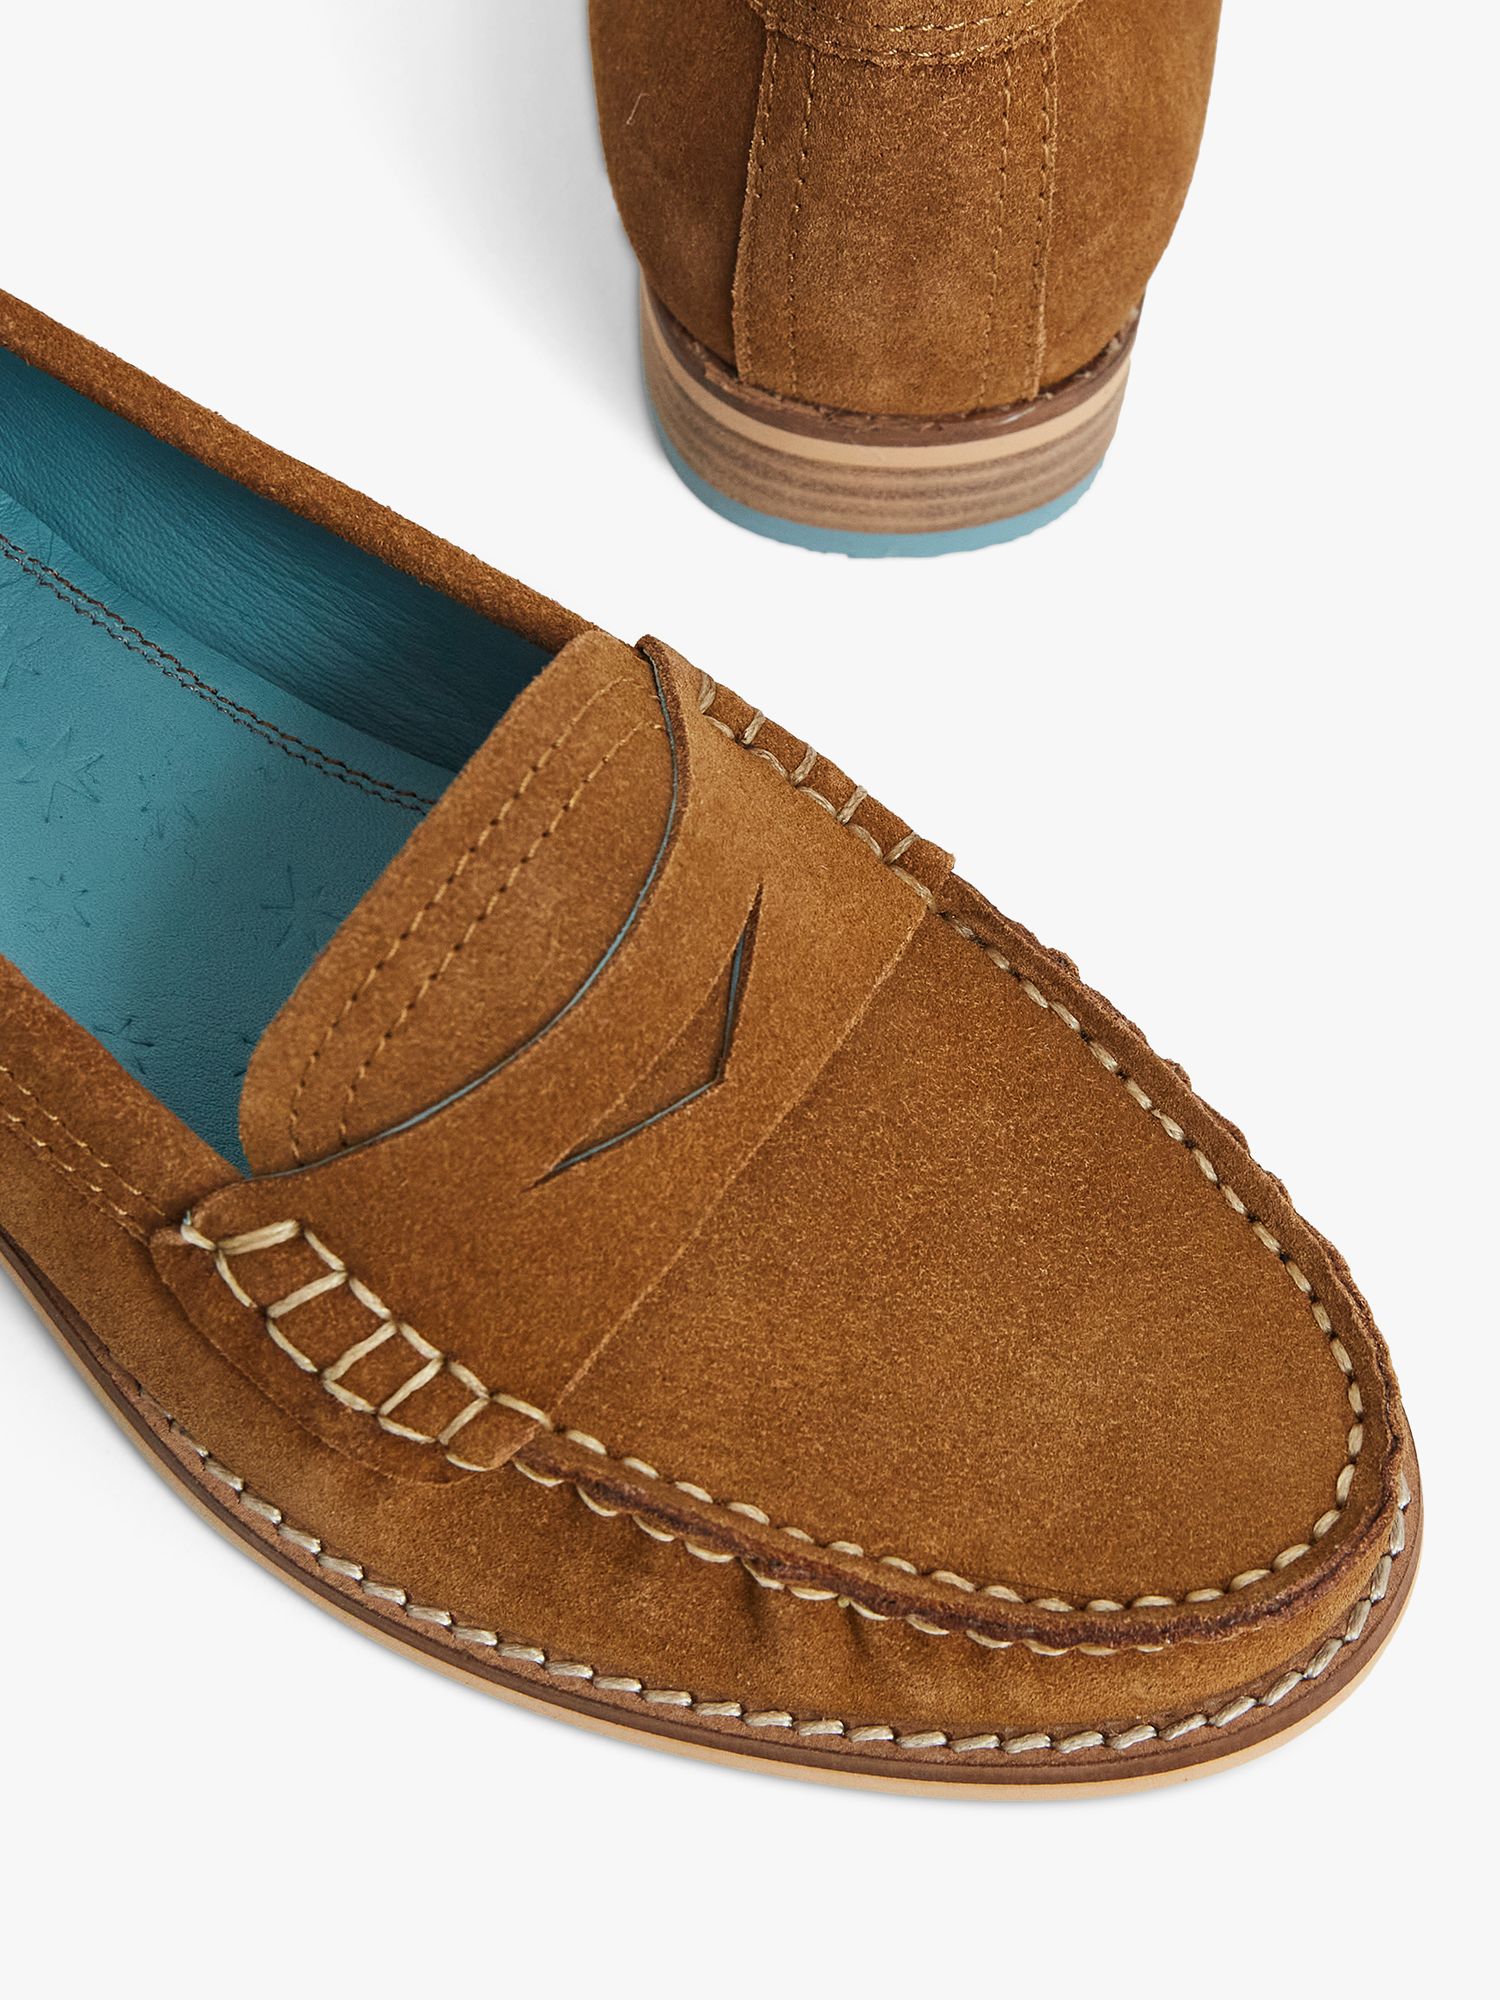 White Stuff Eden Suede Loafers, Tan at John & Partners